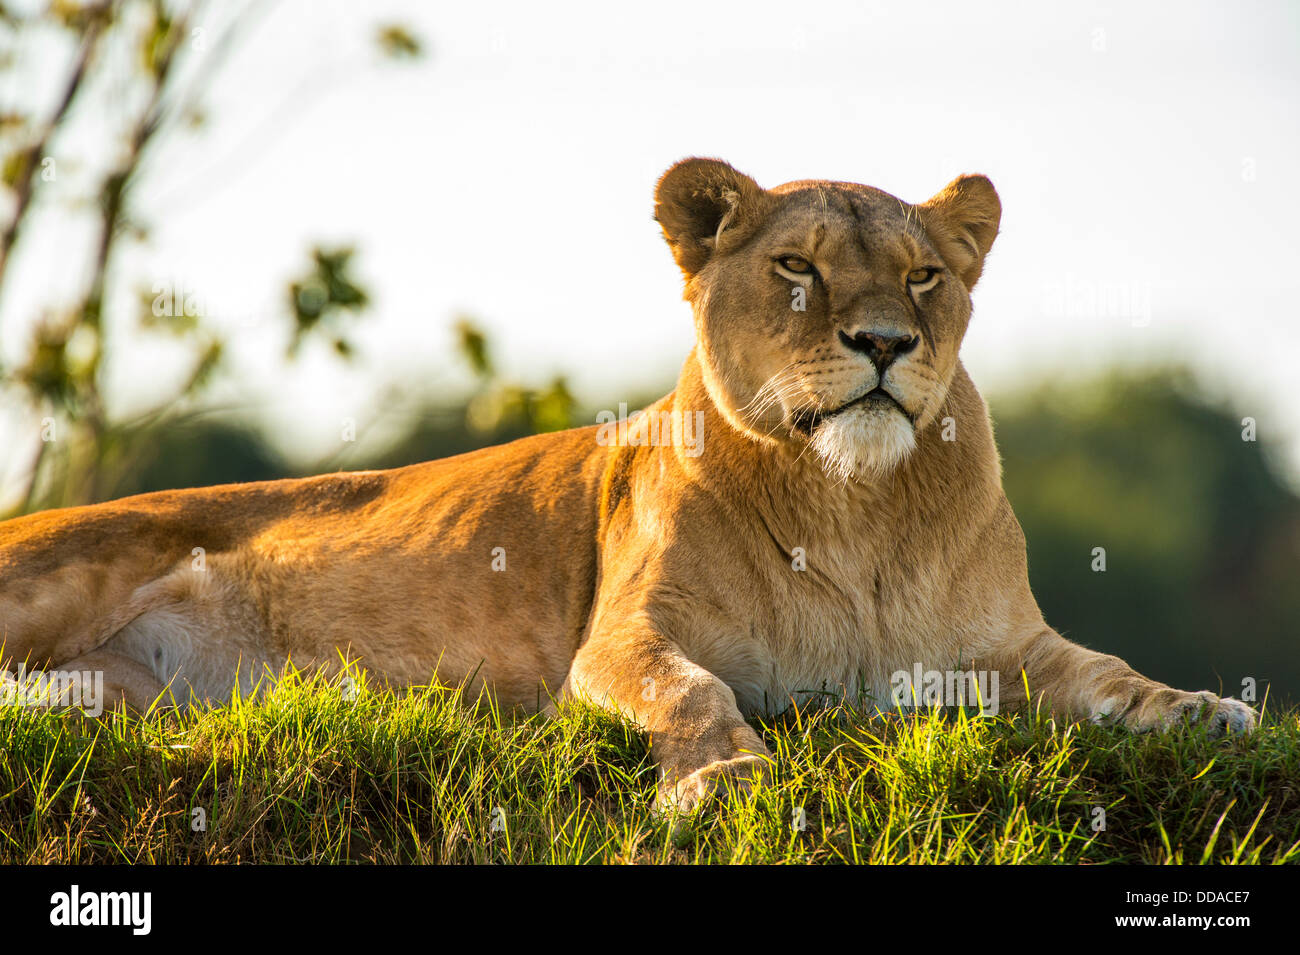 Lioness at rest Stock Photo